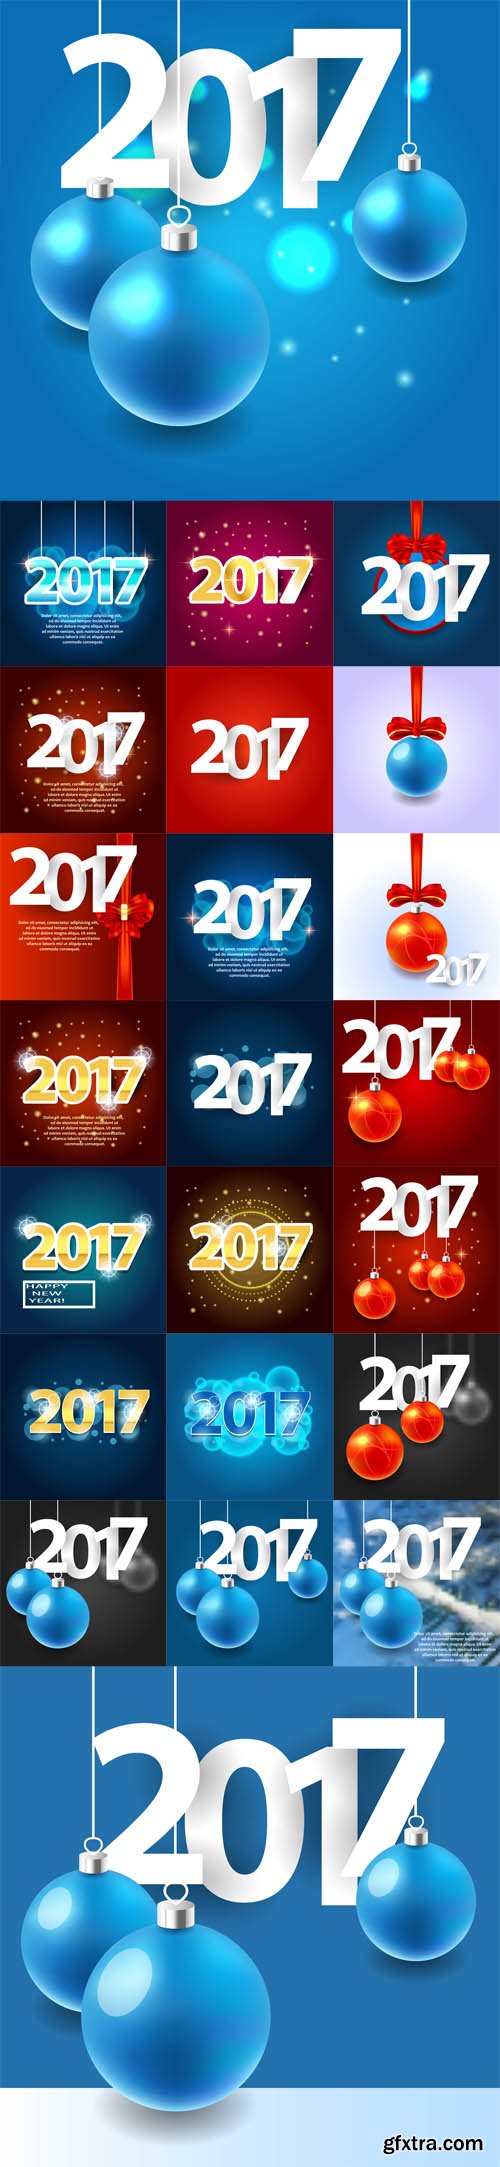 Vector Set - Happy New Year 2017 background. Calendar Template